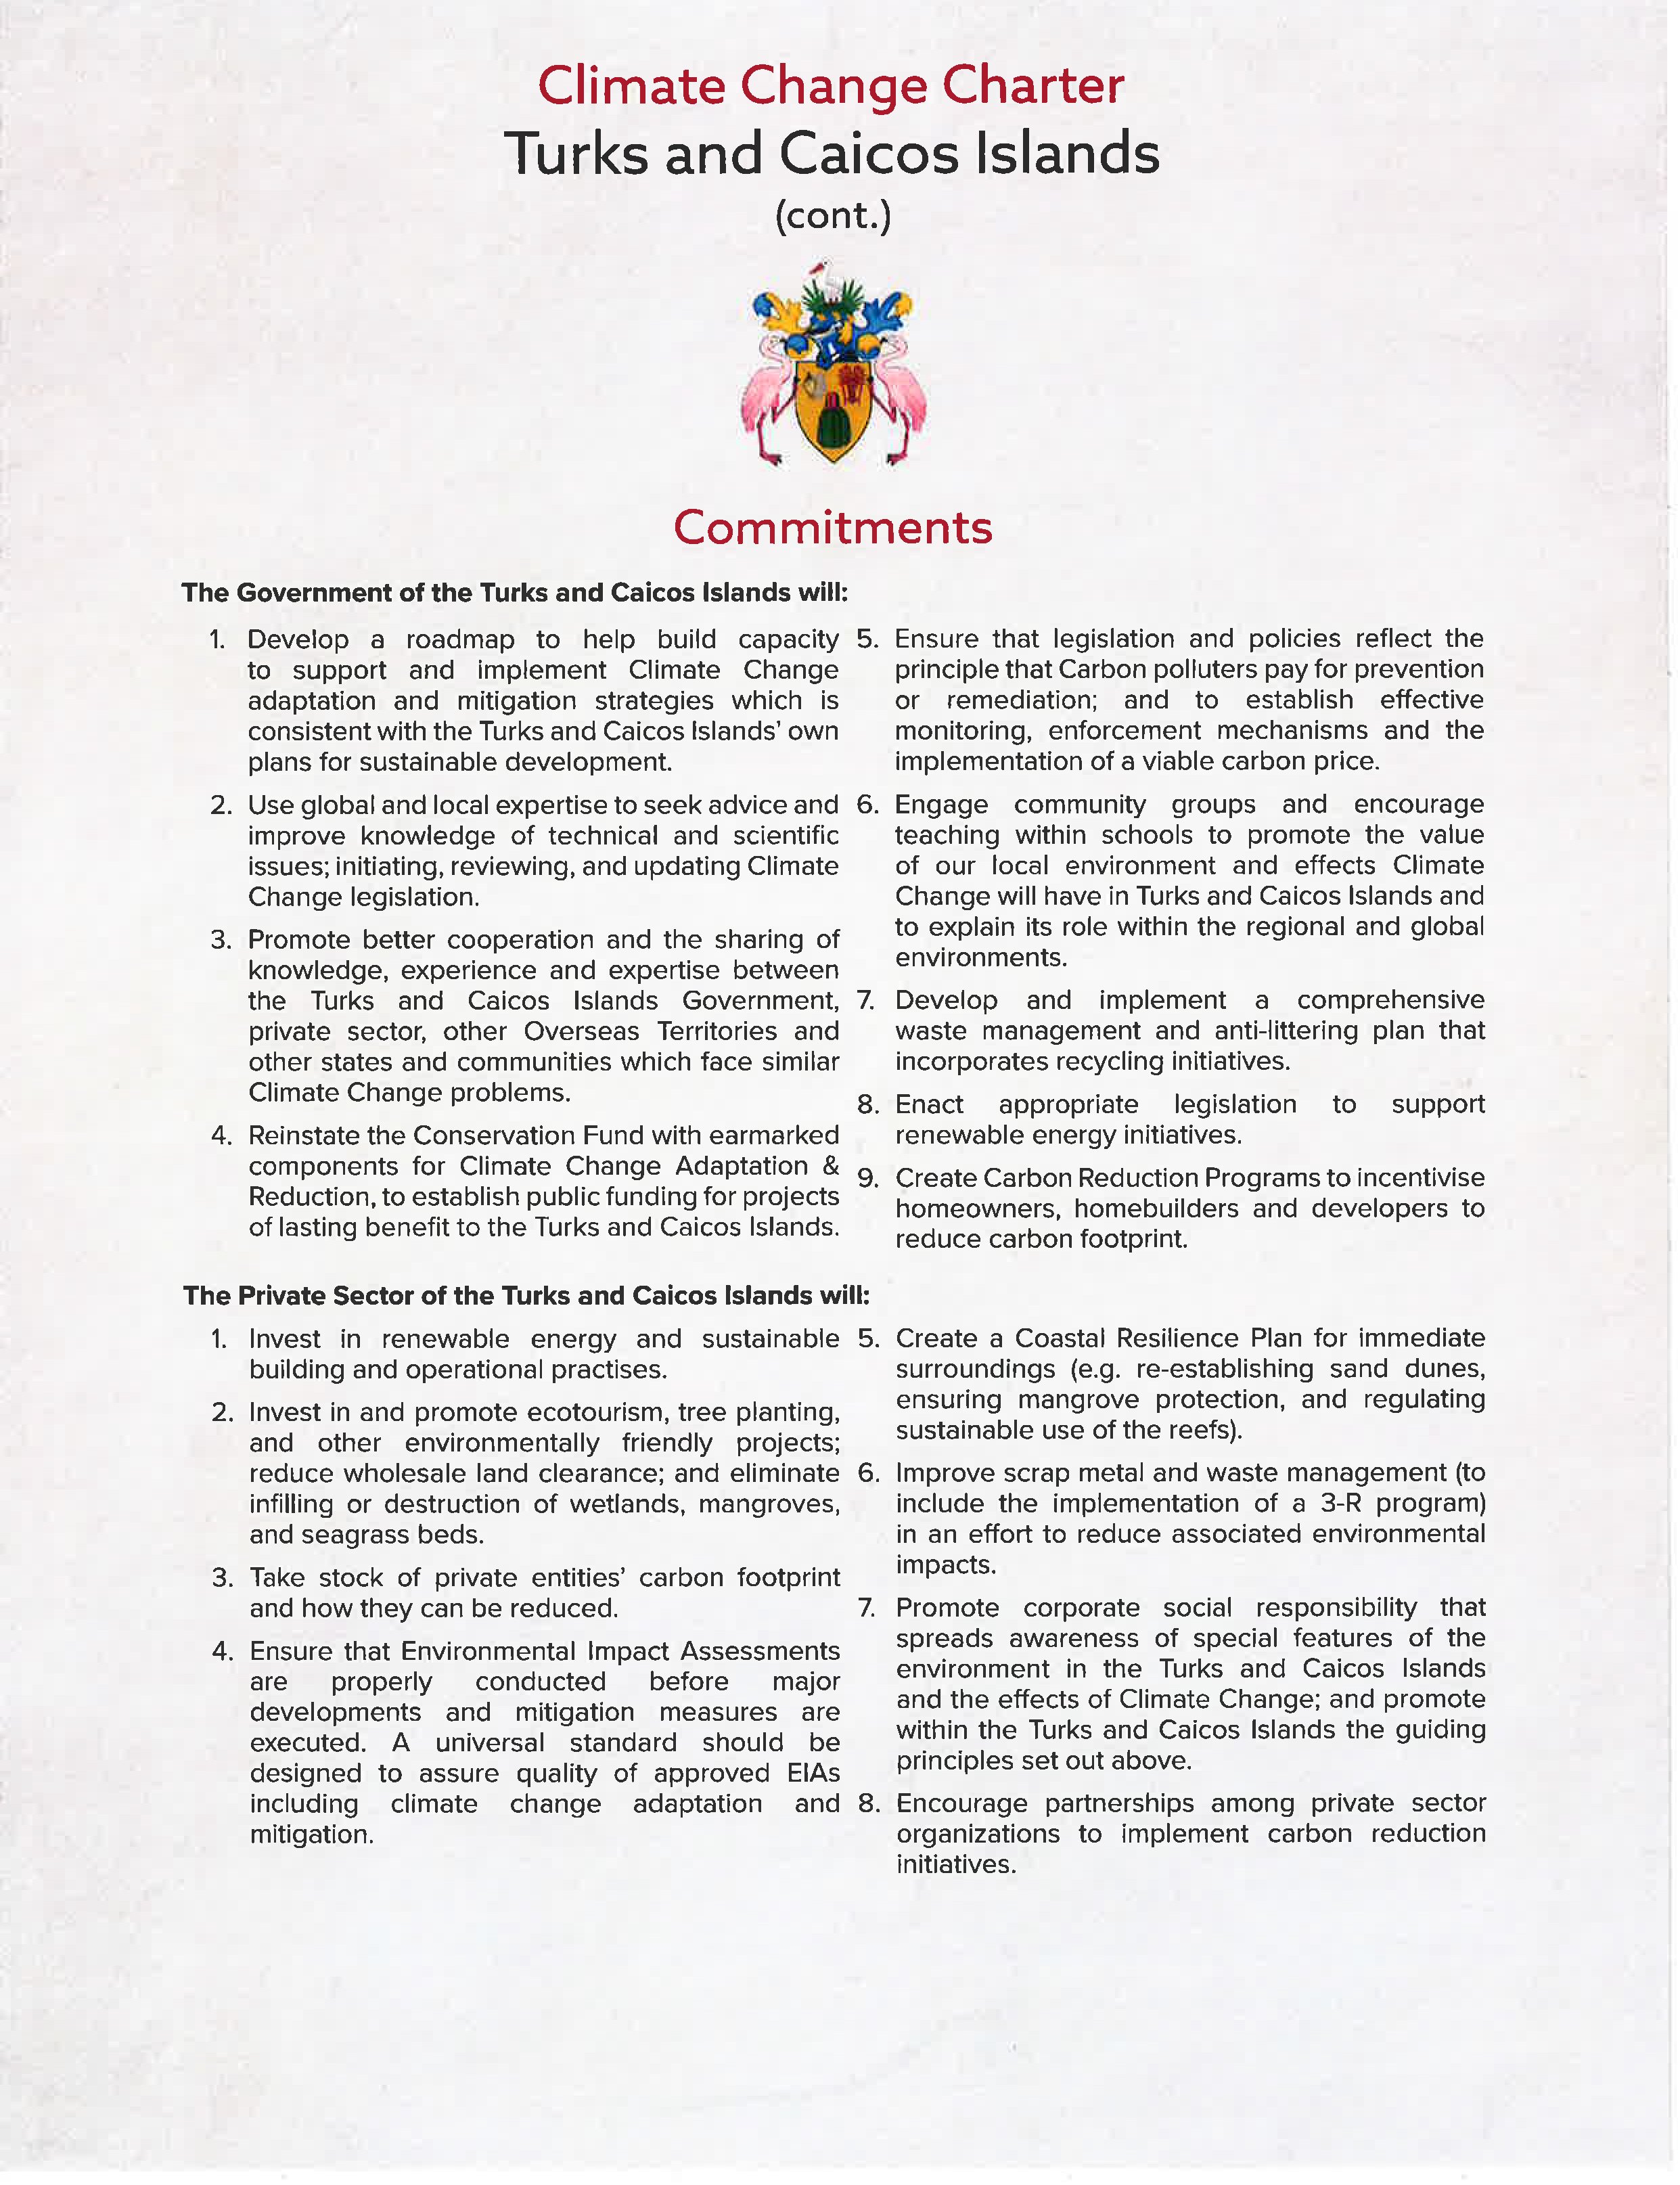 TCI Climate Change  Charter2_Signed-2 copy.jpg